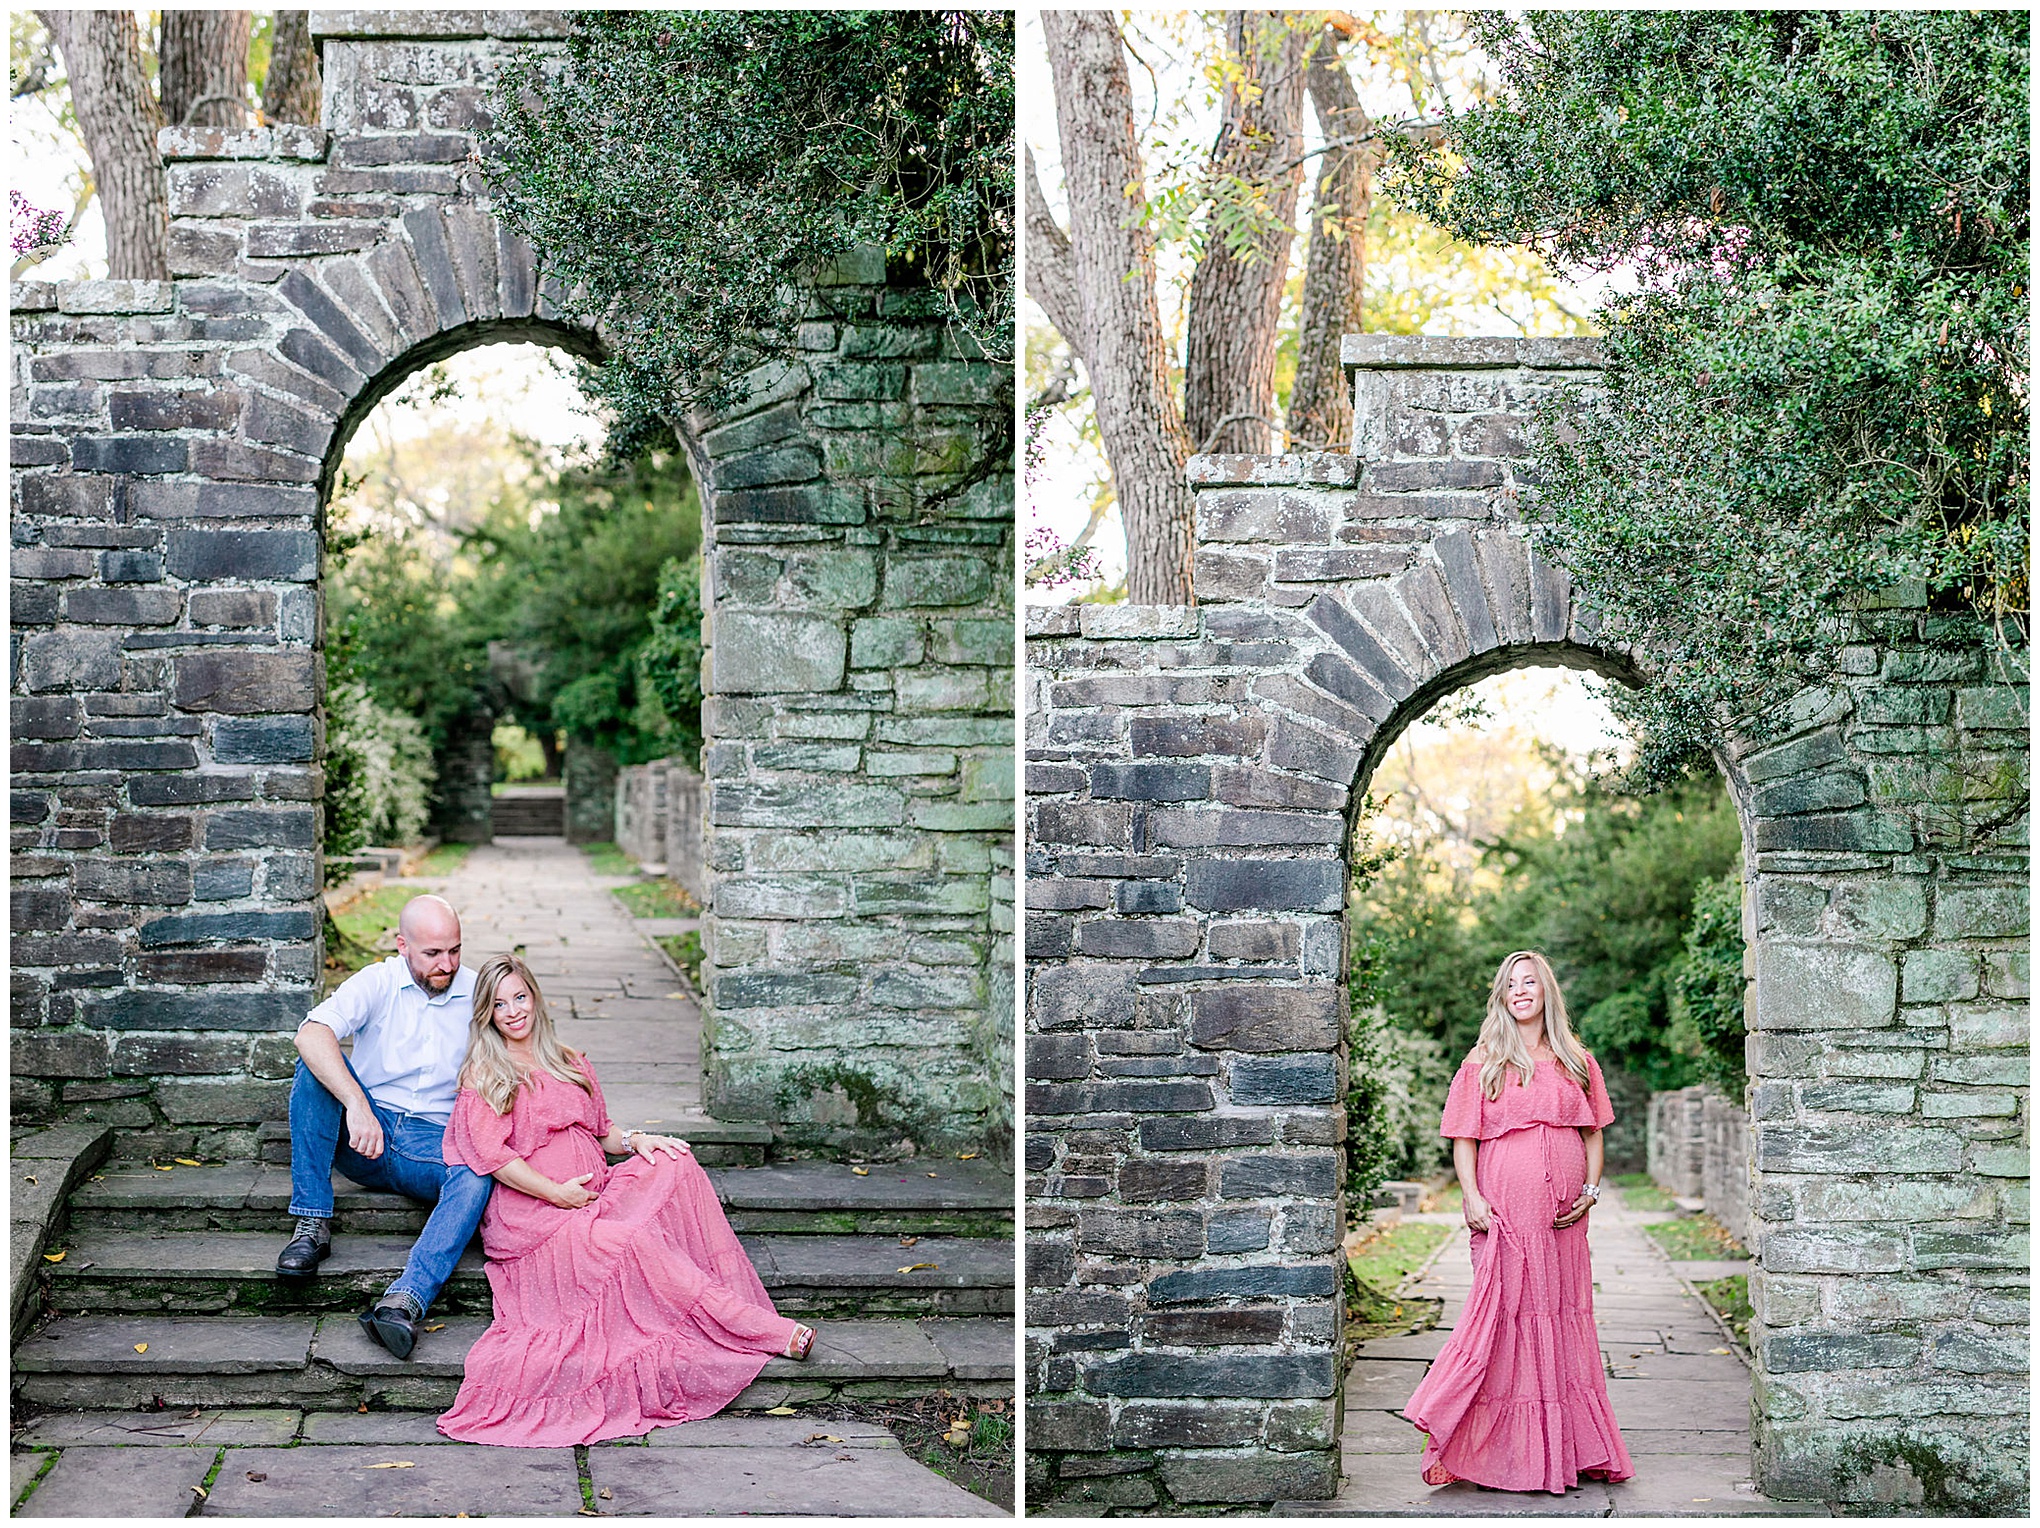 Glenview Mansion maternity session, Glenview Mansion photographer, Glenview Mansion photos, natural light maternity photos, maternity photos outfit ideas, DC photo shoot locations, DC wedding venue, Maryland wedding venue, autumn maternity photos, Rachel E.H. Photography, pregnant woman in pink dress, couple sitting on stone stairs